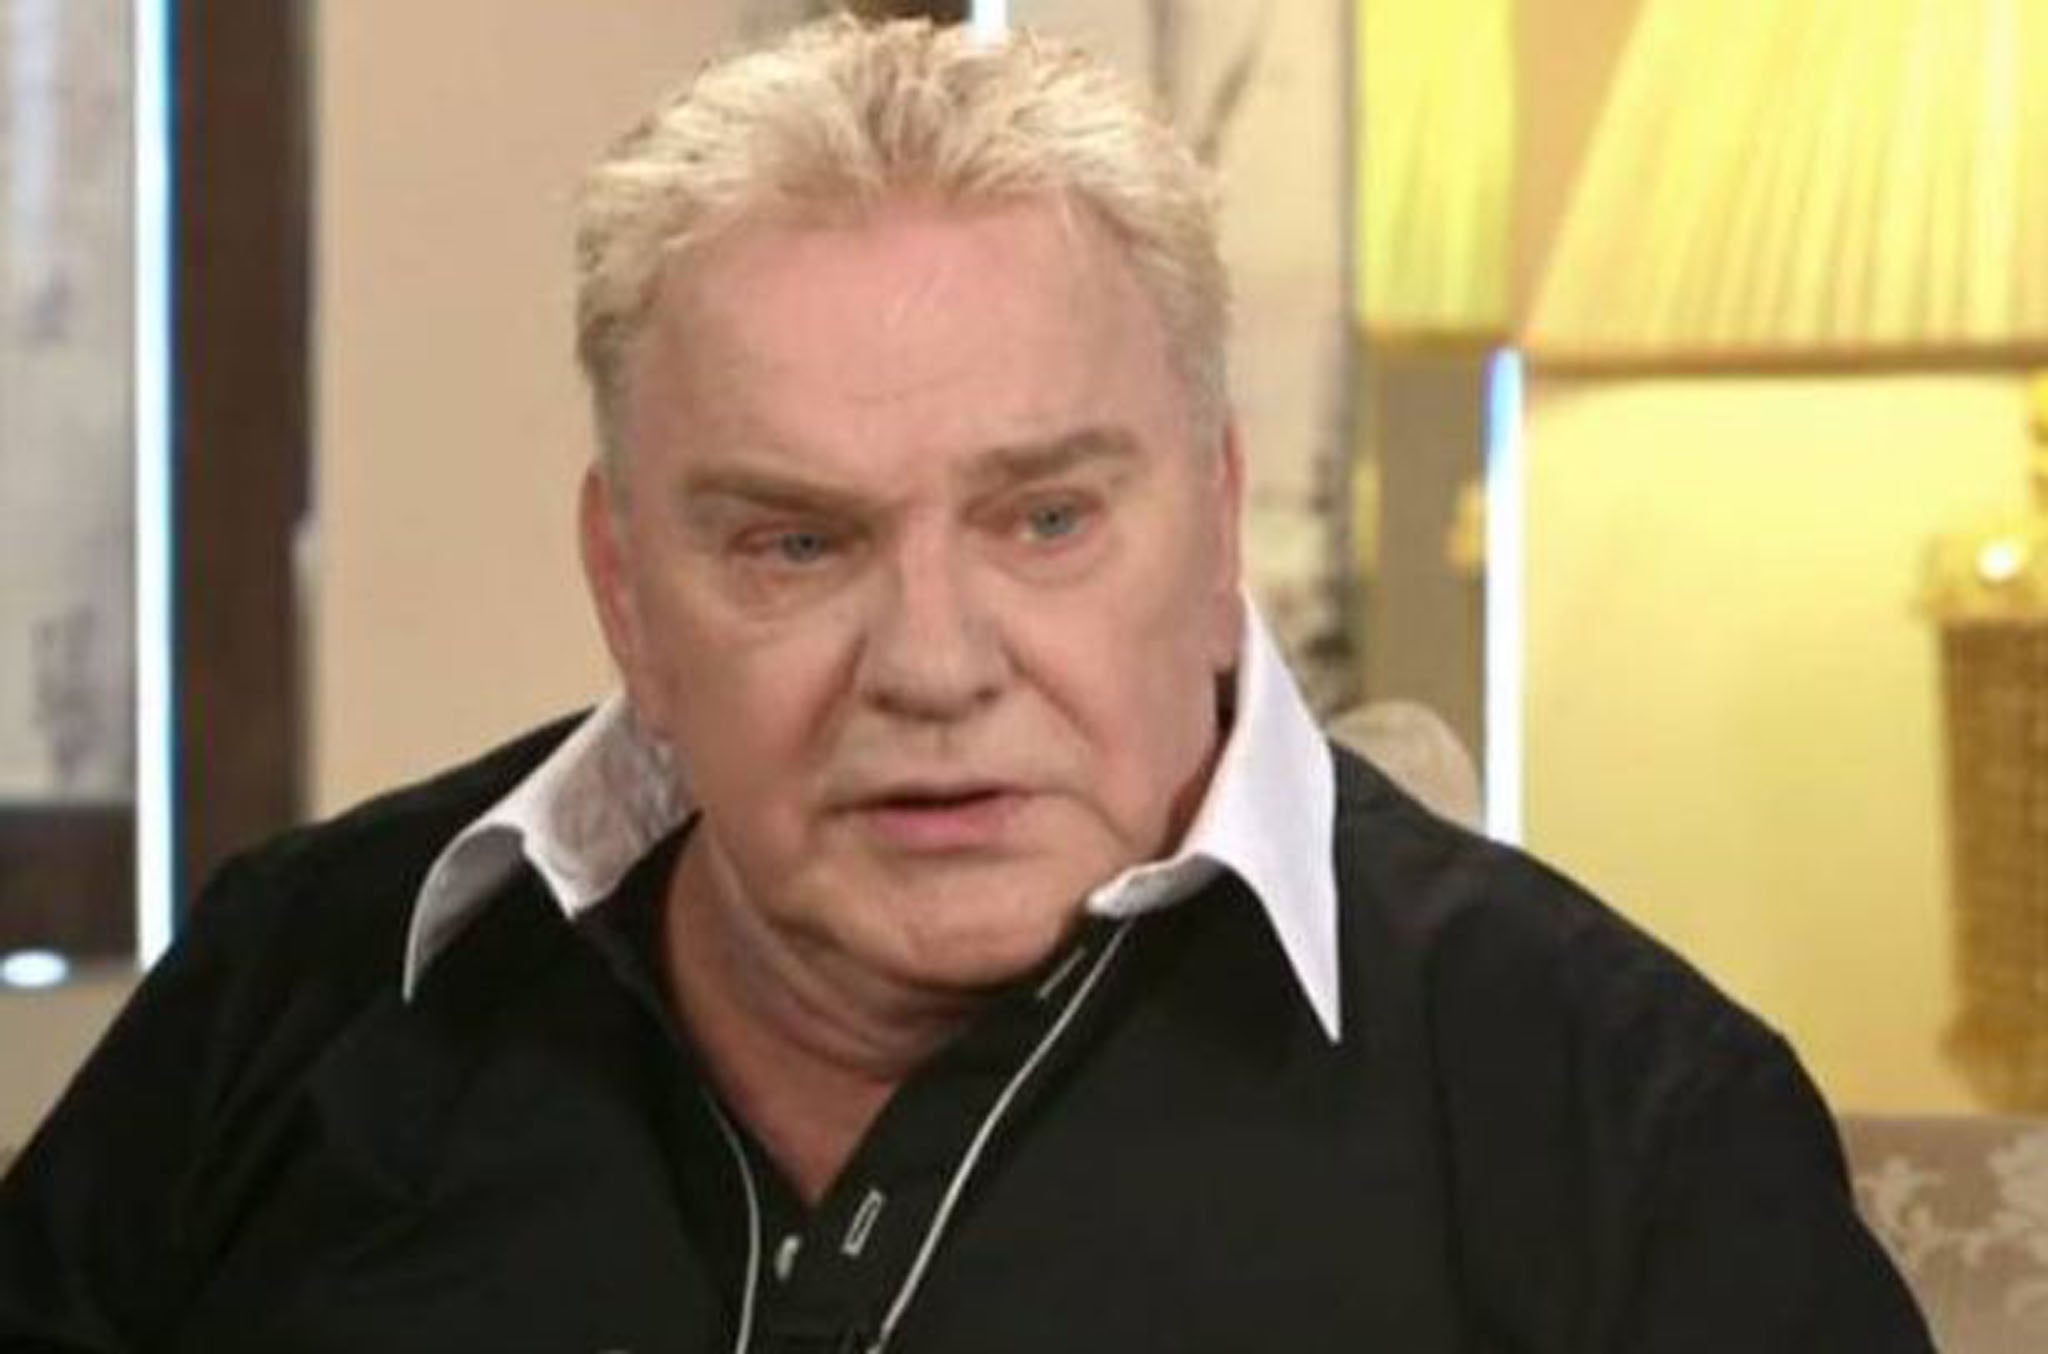 Freddie Starr stormed out of an interview with Susanna Reid for Good Morning Britain